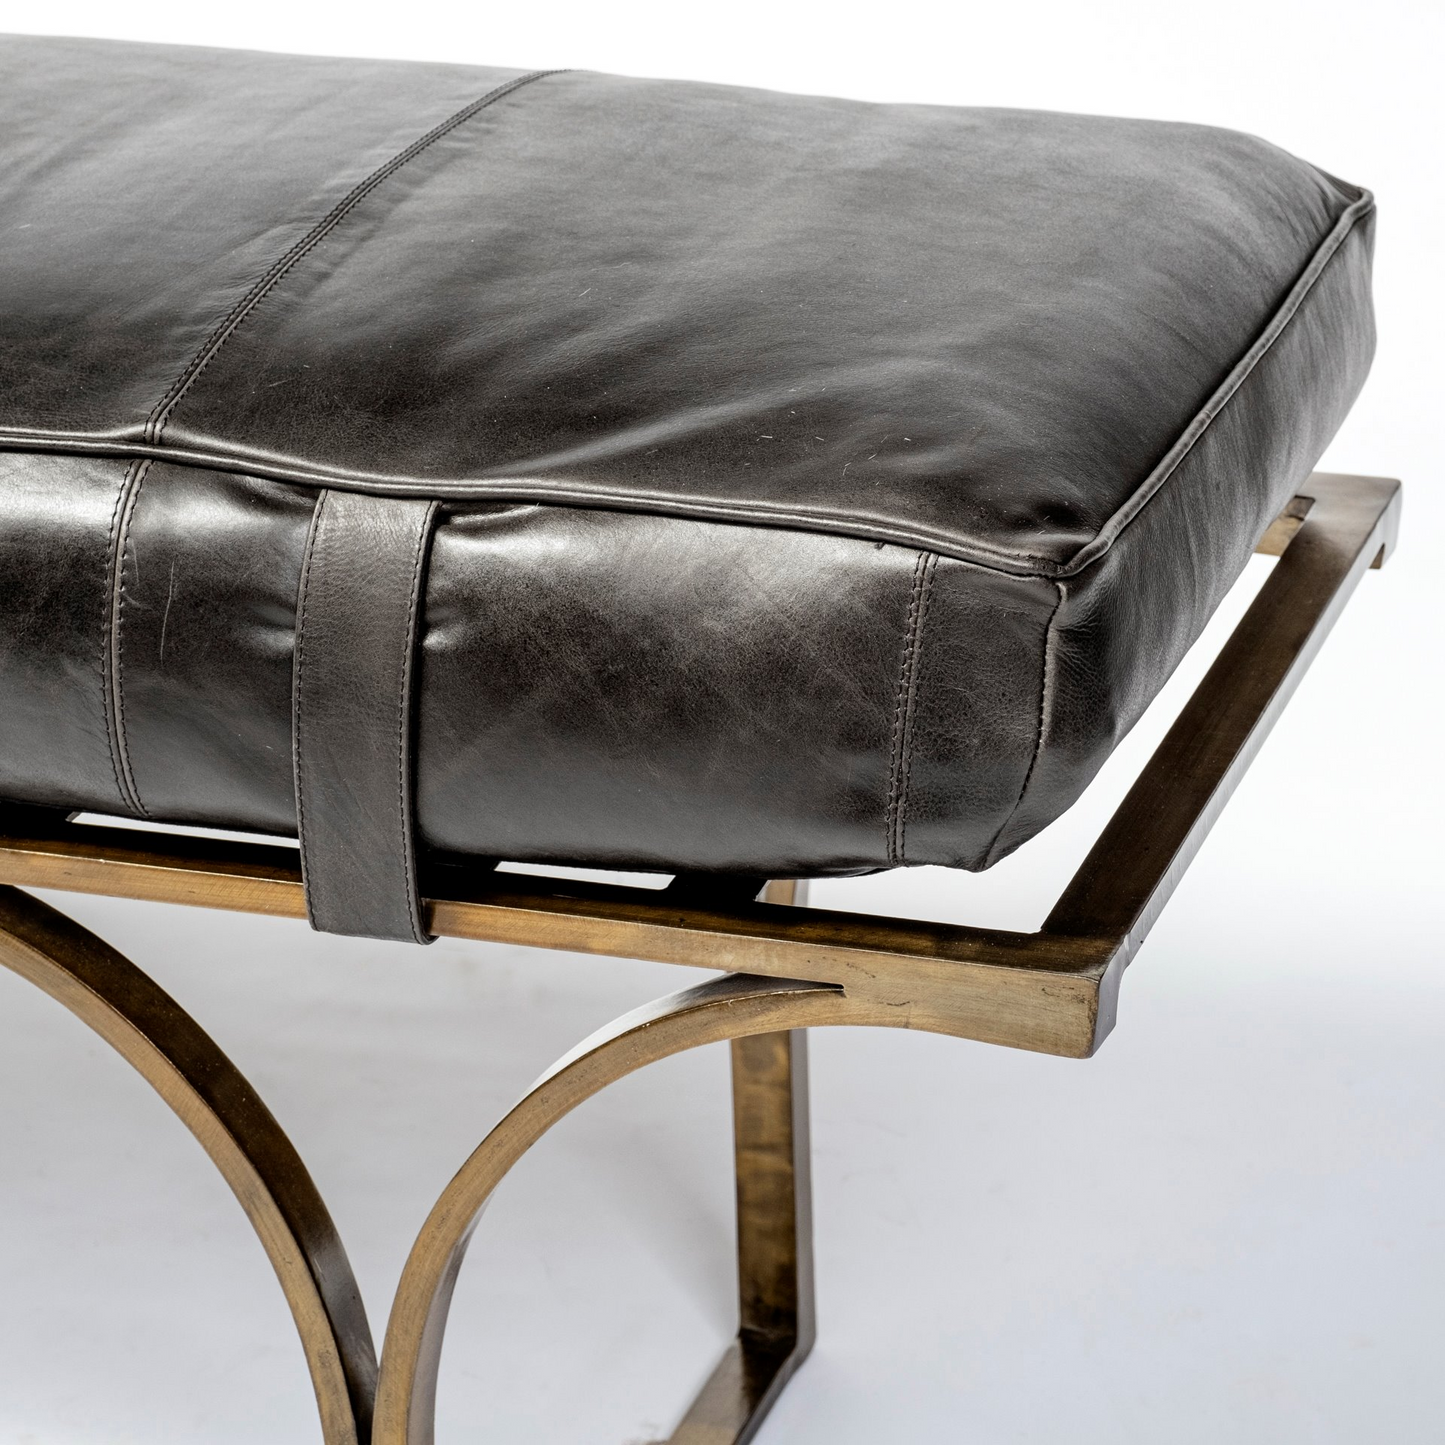 Rectangular Genuine Leather Seat Accent Bench